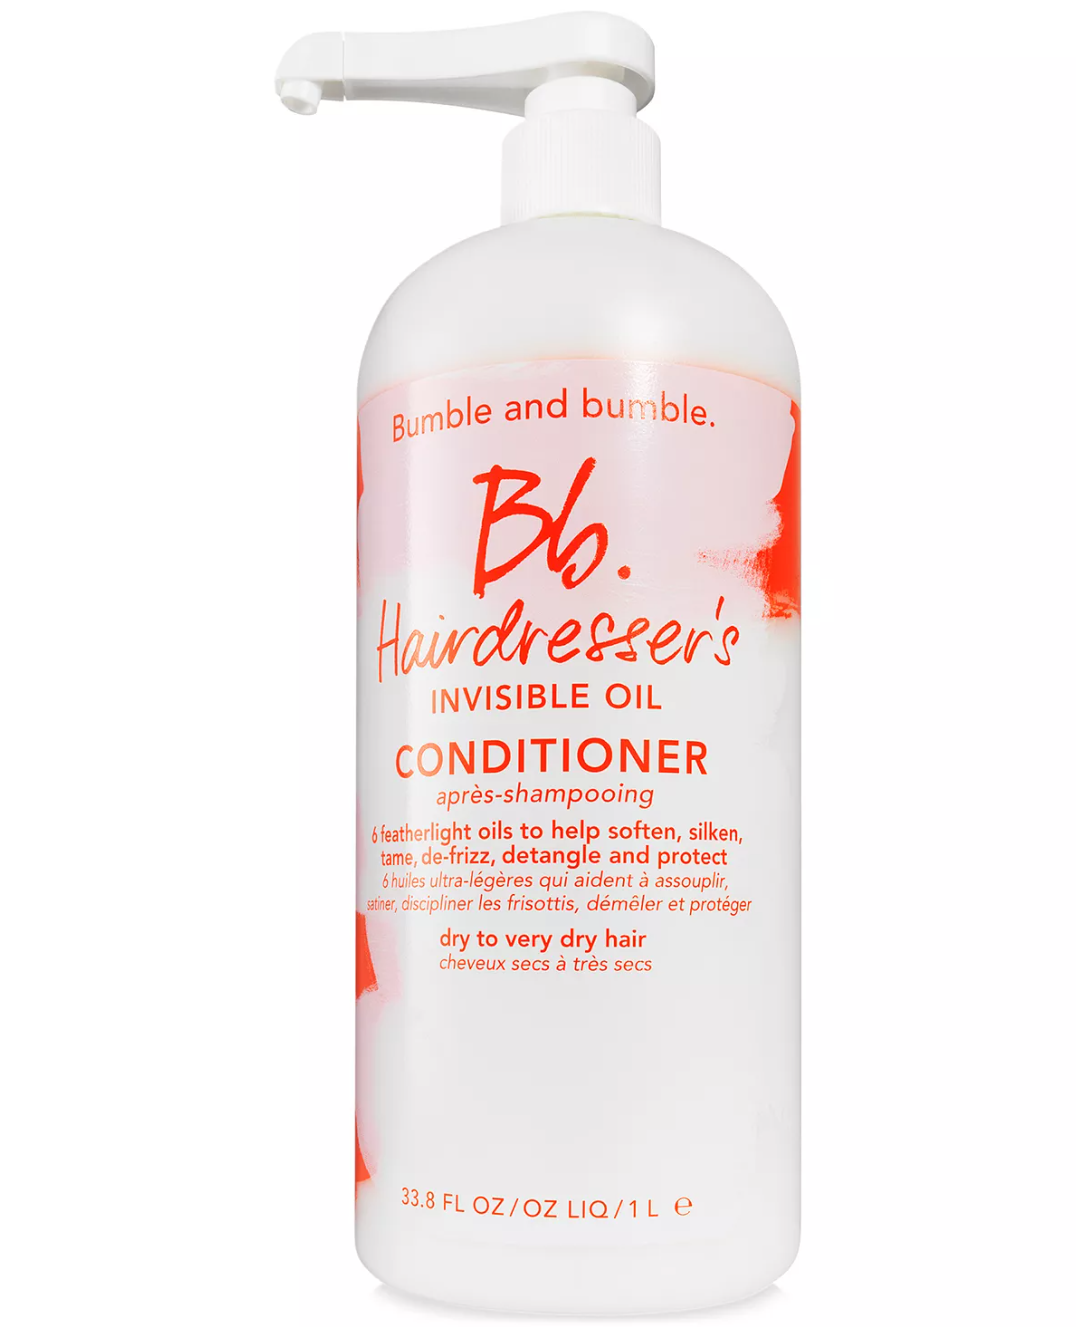 Hairdresser’s Invisible Oil Conditioner